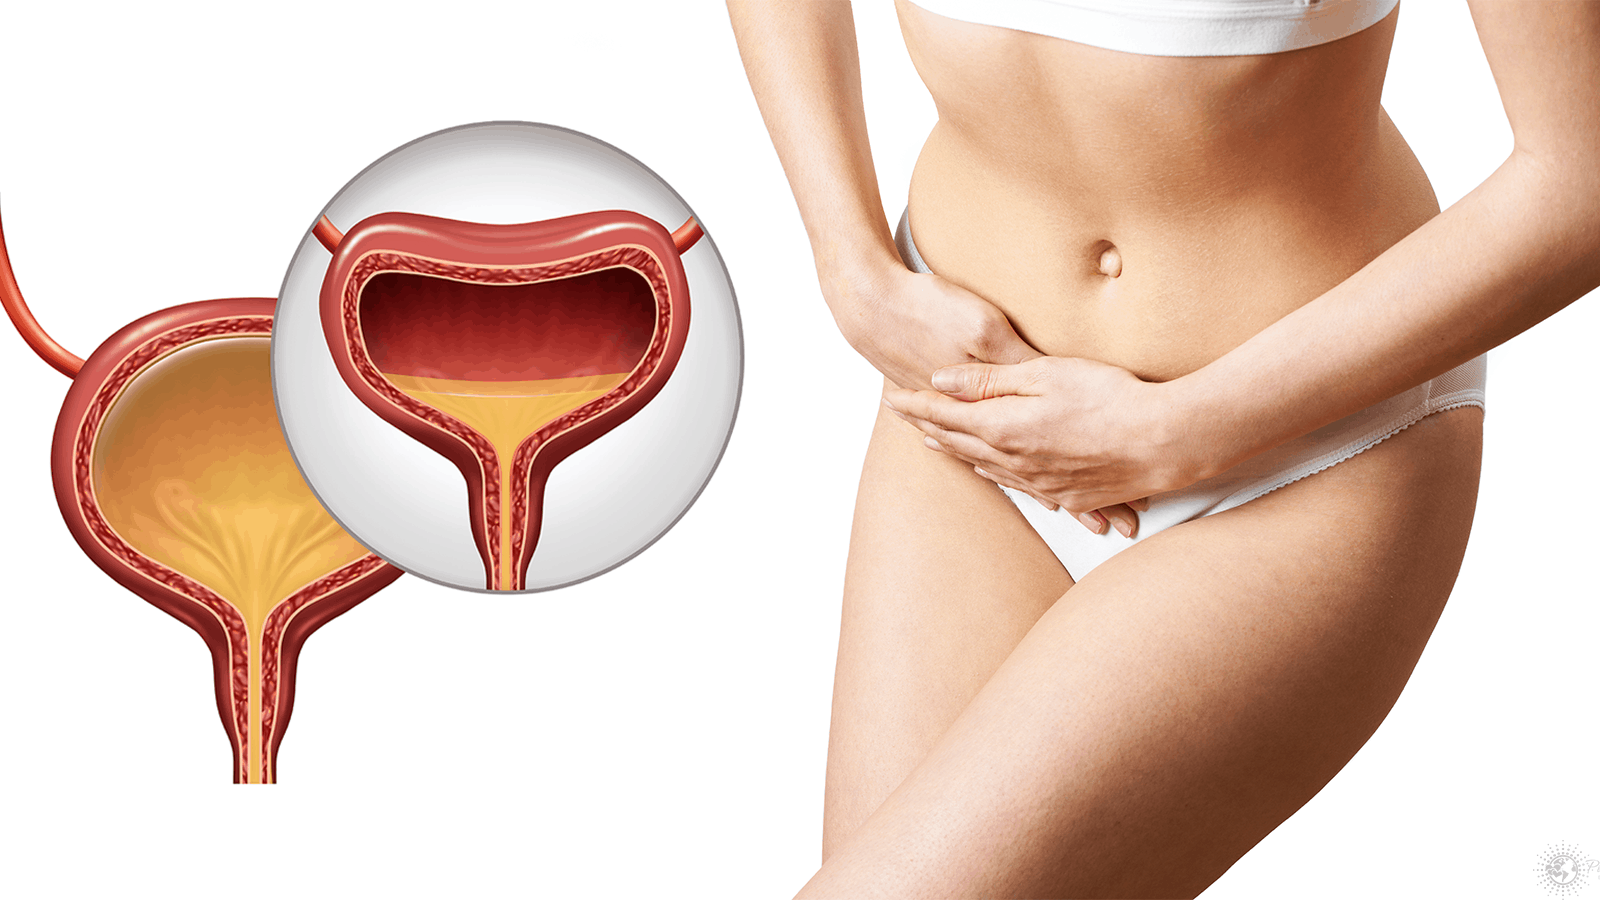 symptoms of a bladder infection